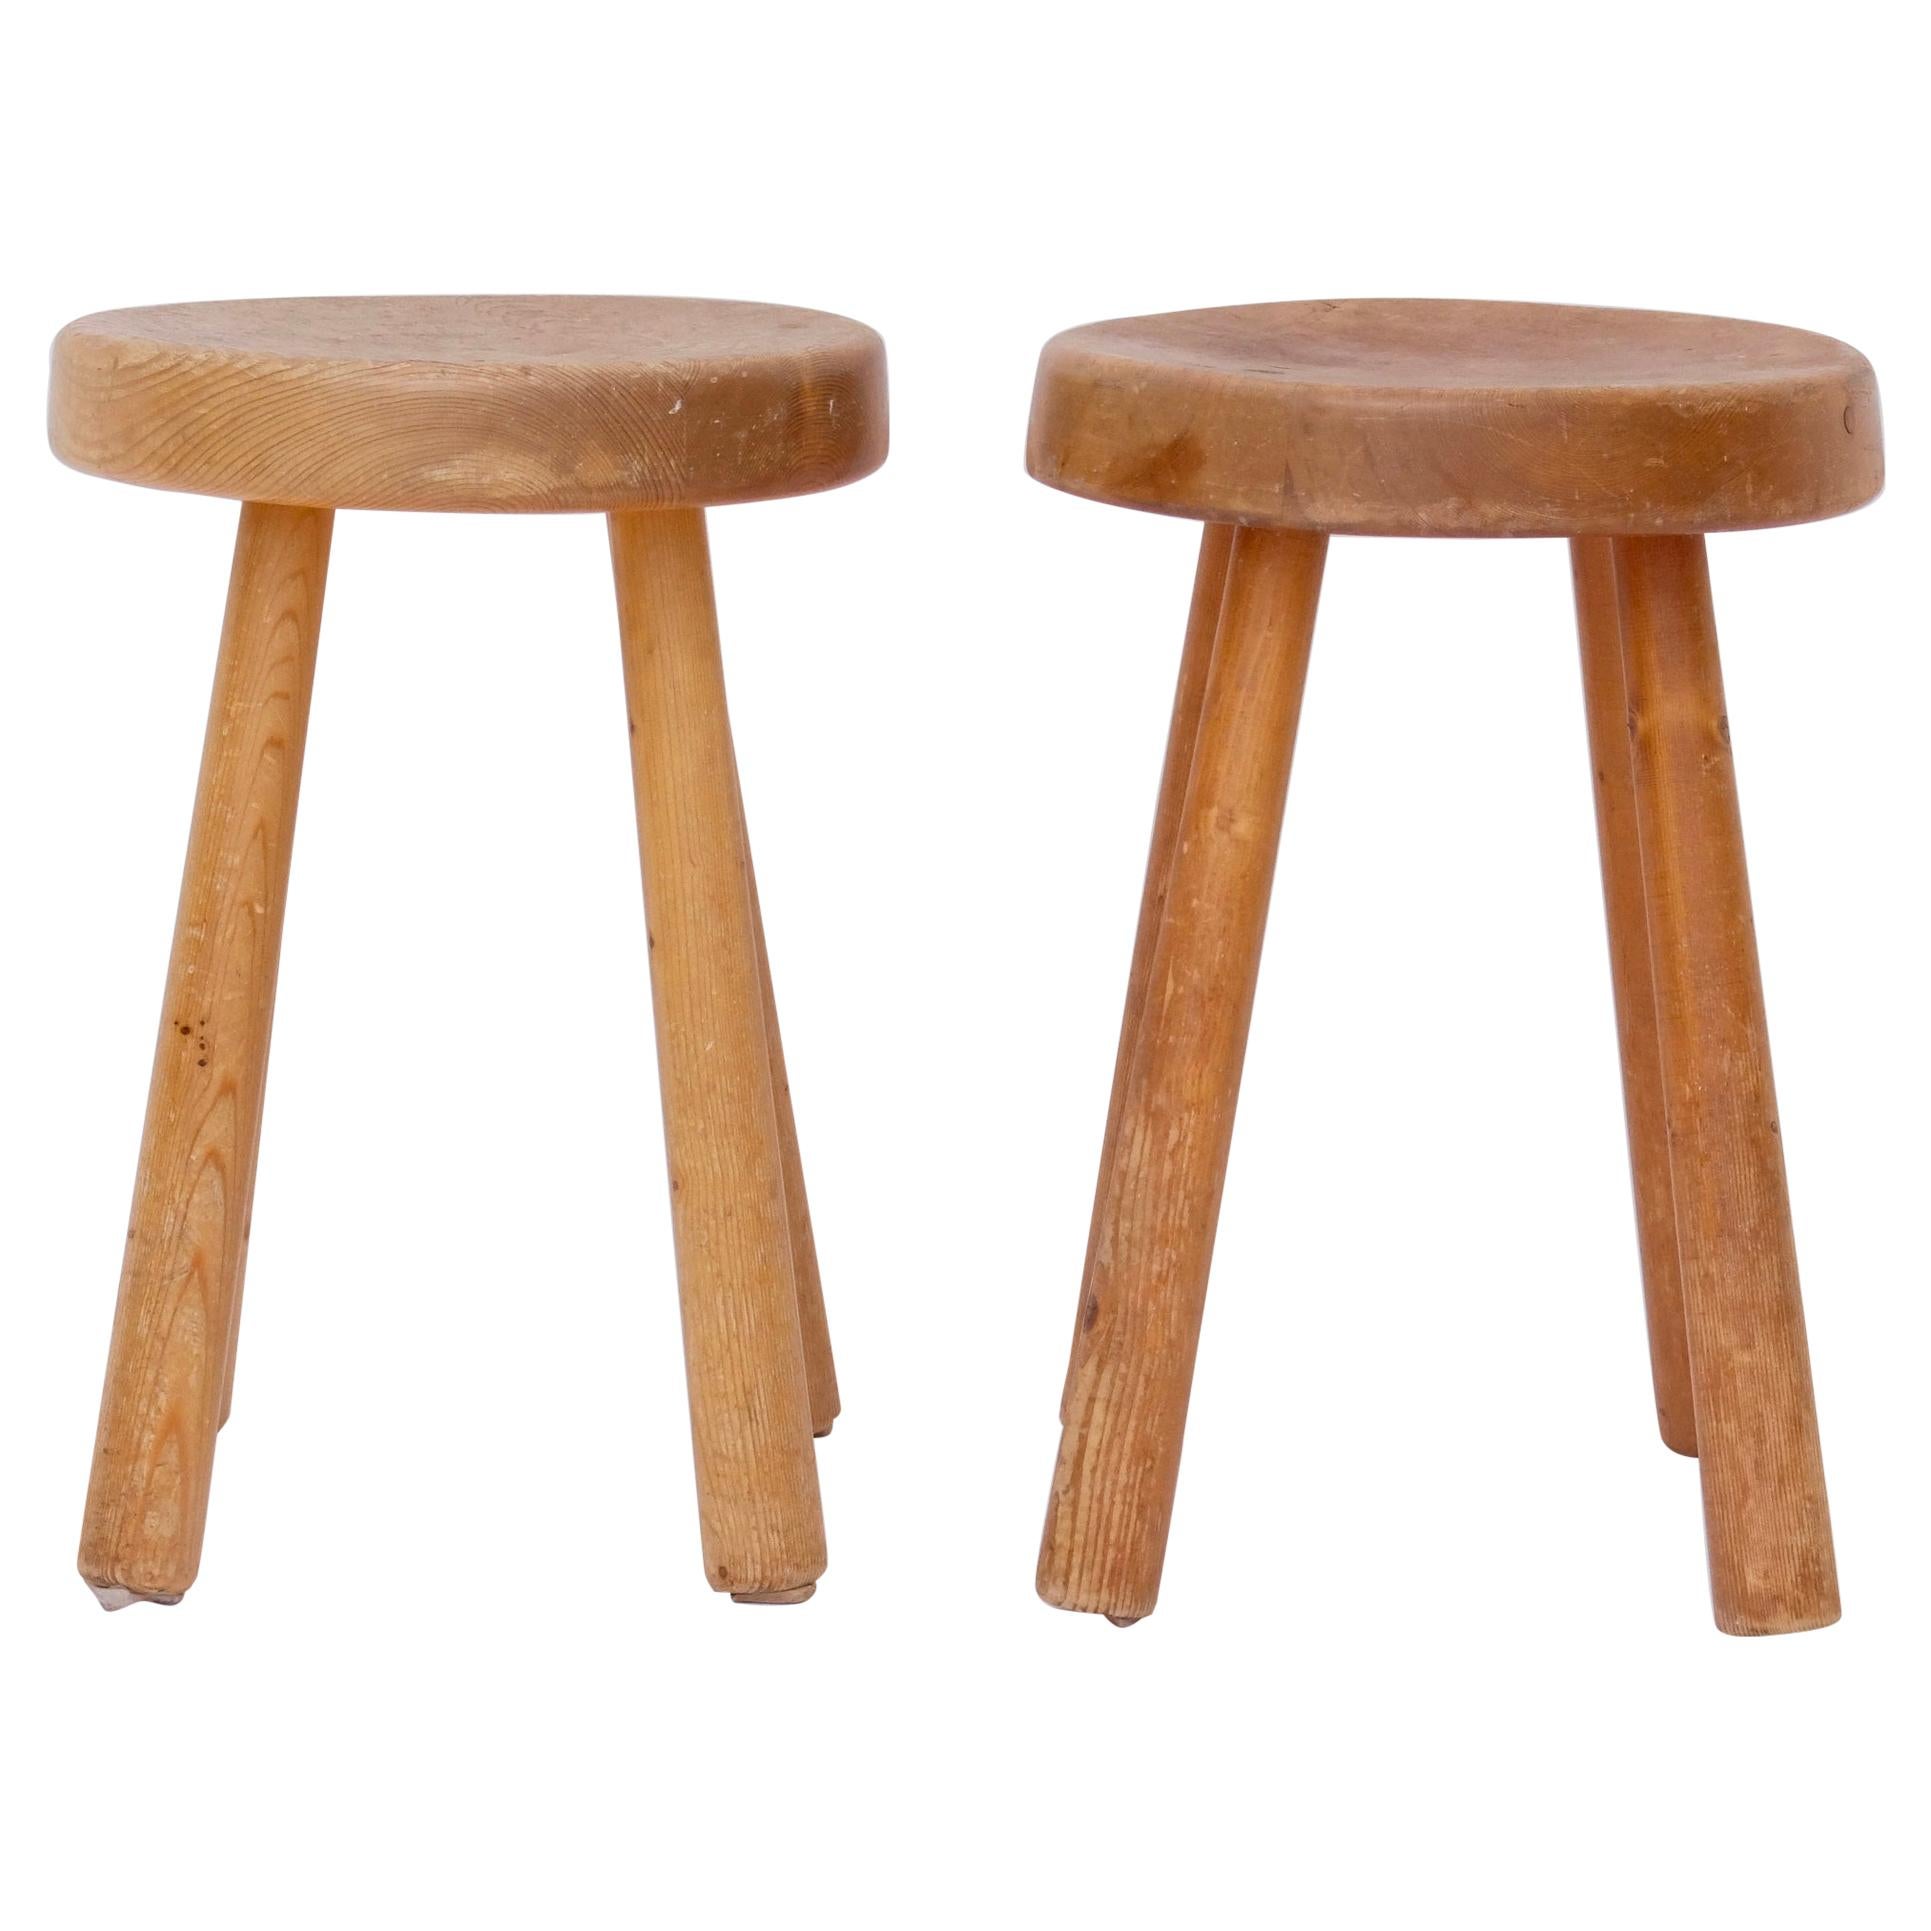 Very Rare Set of Charlotte Perriand 4 Legs Configuration Stools